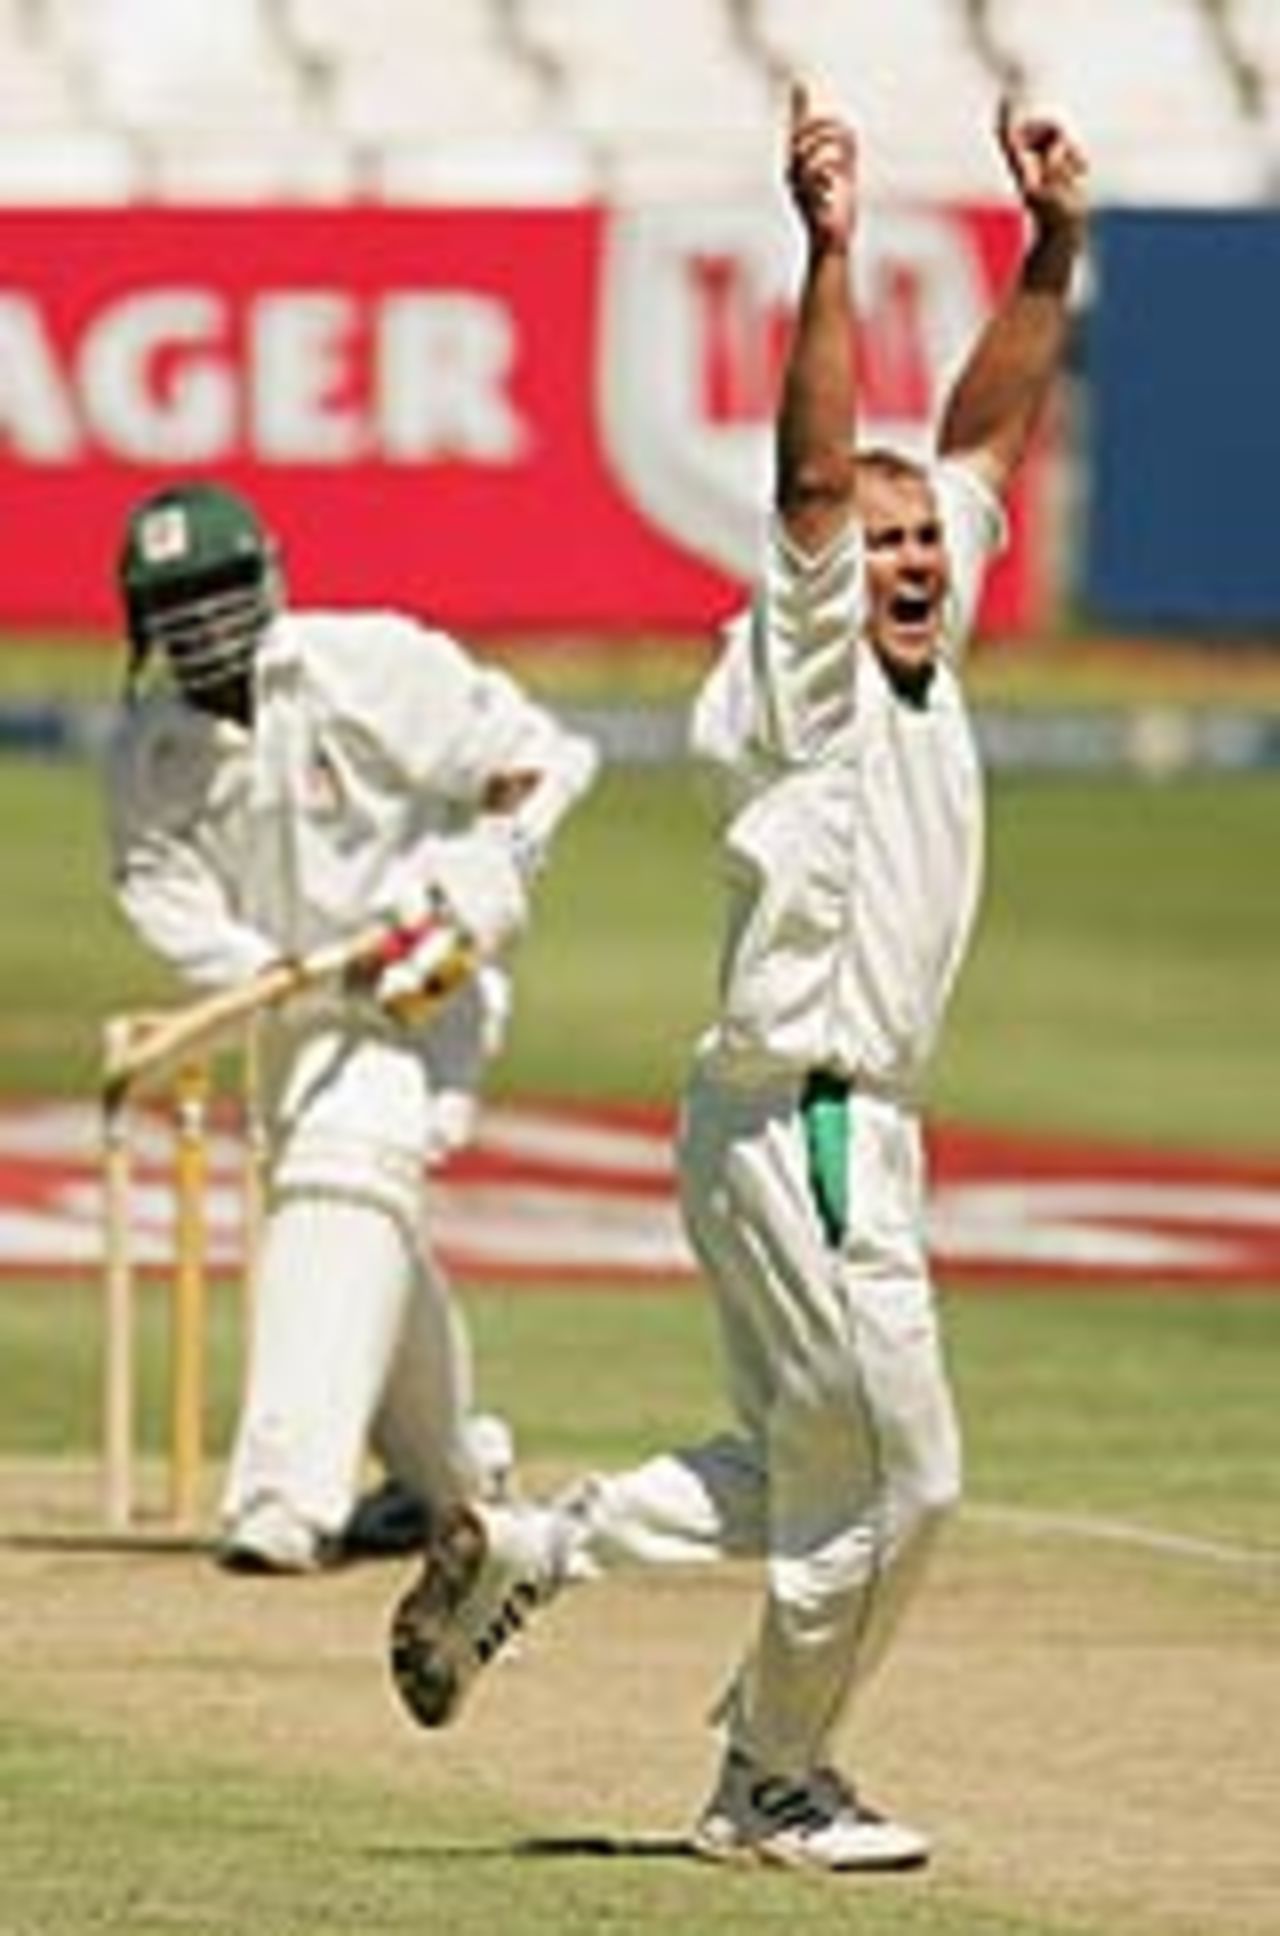 Jacques Kallis appeals successfully against Hamilton Masakadza, South Africa v Zimbabwe, 1st Test, Cape Town, March 4, 2005